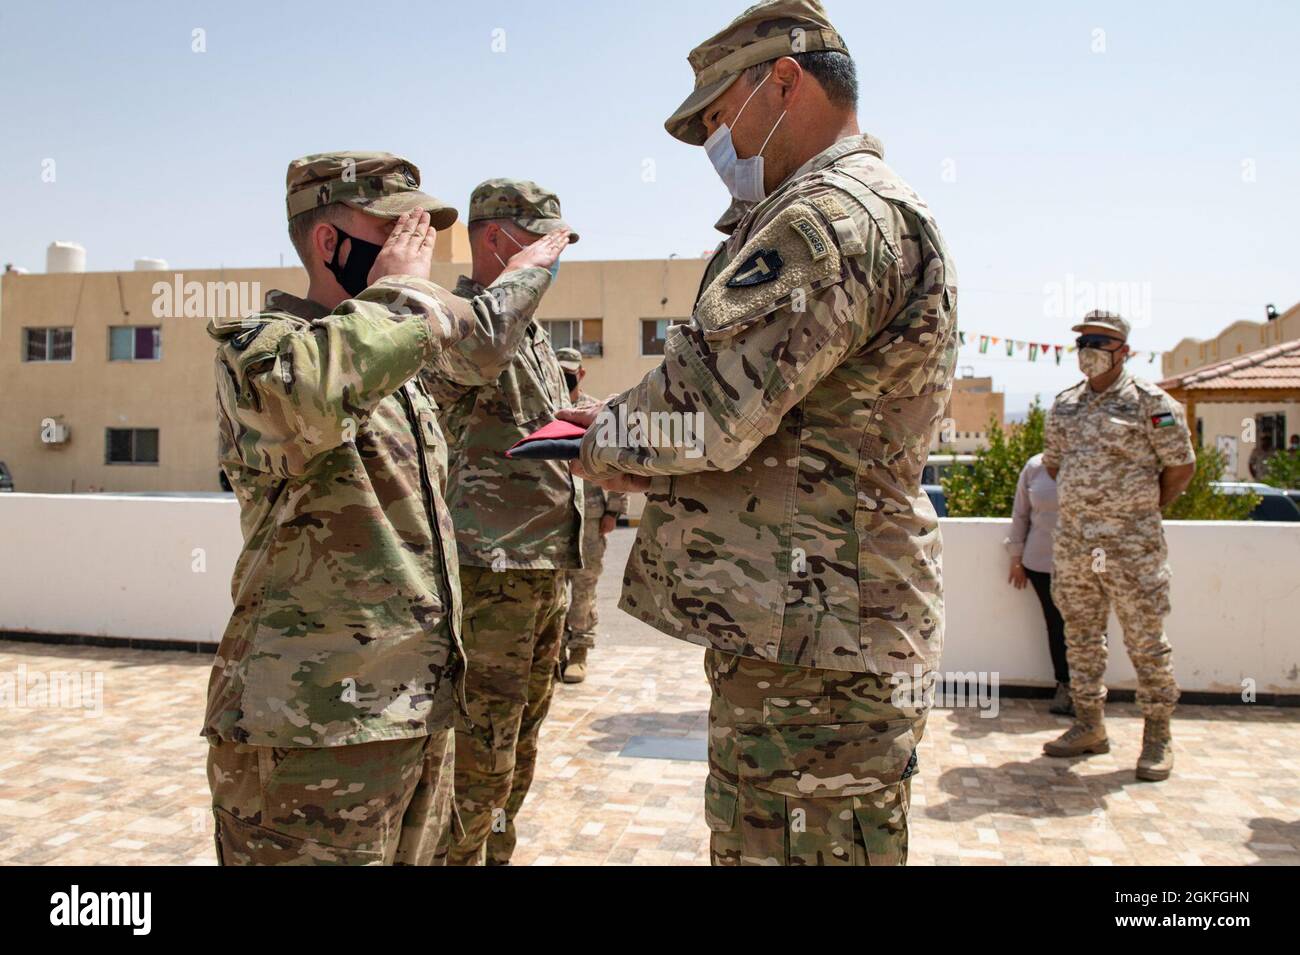 The Jordanian Armed Forces, Southern Command, 3rd Border Guard Group Commander, Col. Ra'ad Al Aamayra, and Task Force Spartan Division Tactical- Jordan Officer in Charge, Col. Christopher Fletcher, exchange flags in a symbolic gesture of friendship and partnership following the successful completion of the Desert Warrior 21 live-fire exercise, April 8, 2021. The exercise was viewed by JAF General Officers and senior leaders from U.S. Army Central and TF Spartan. Moments of expressed gratitude help to solidify the enduring relationship between the two forces. Stock Photo